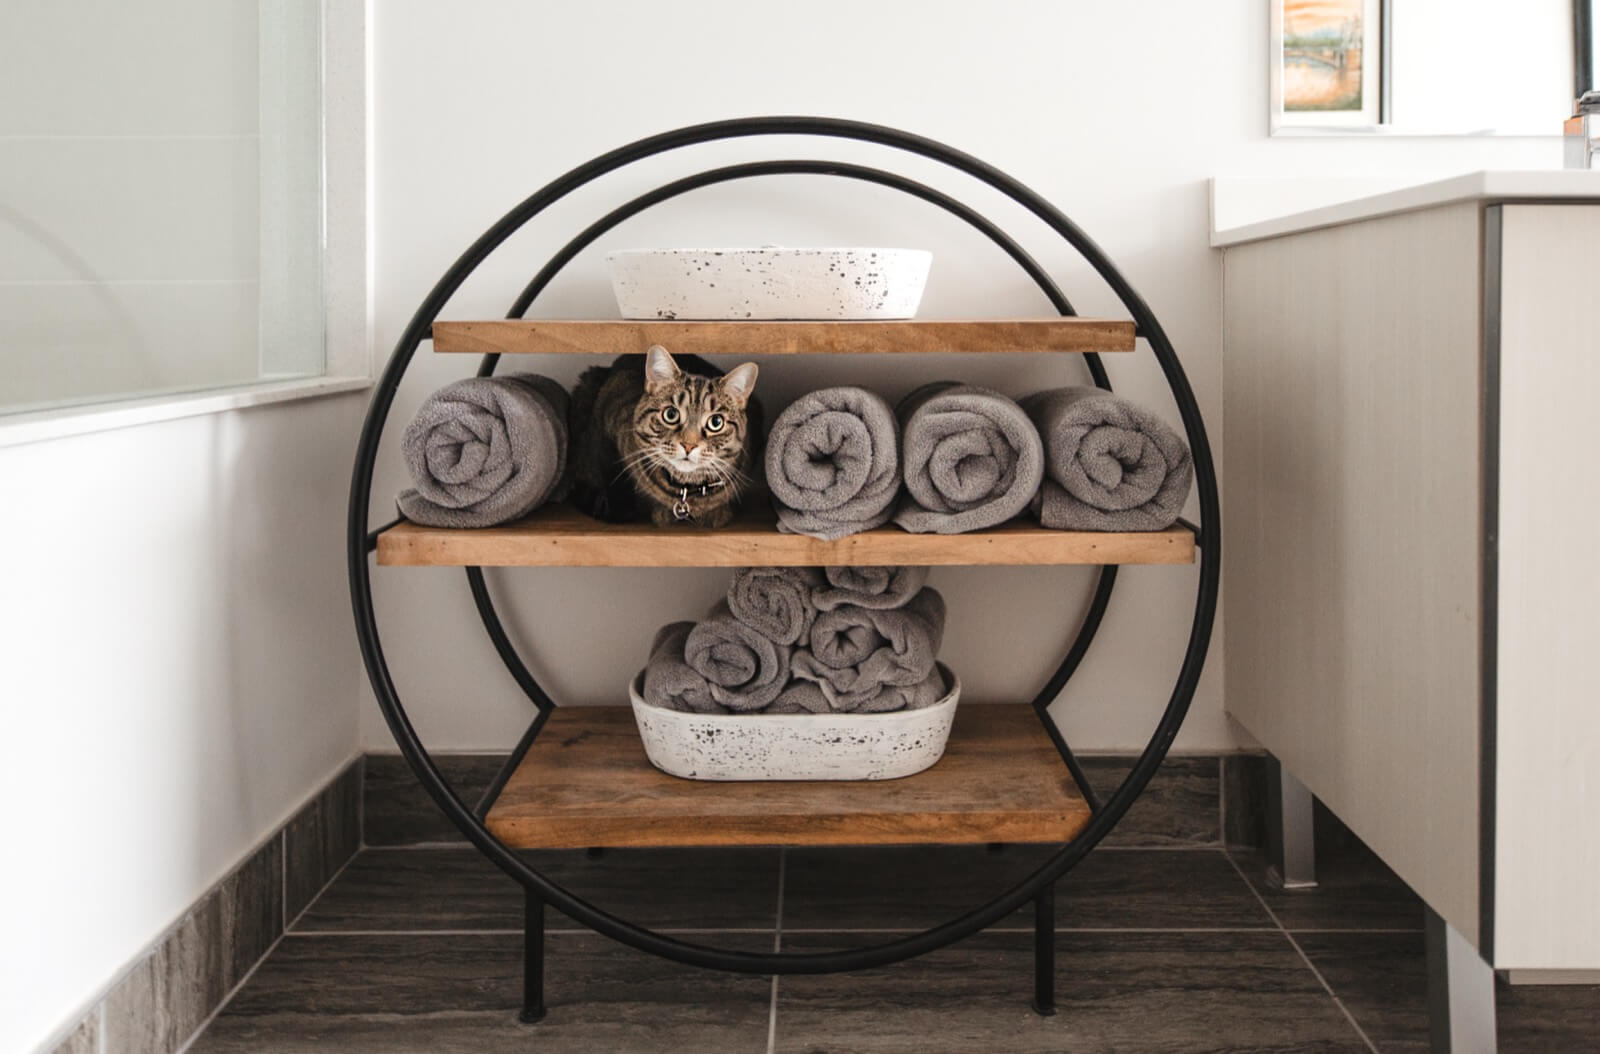 Home Staging - Home Decor With a Kitty